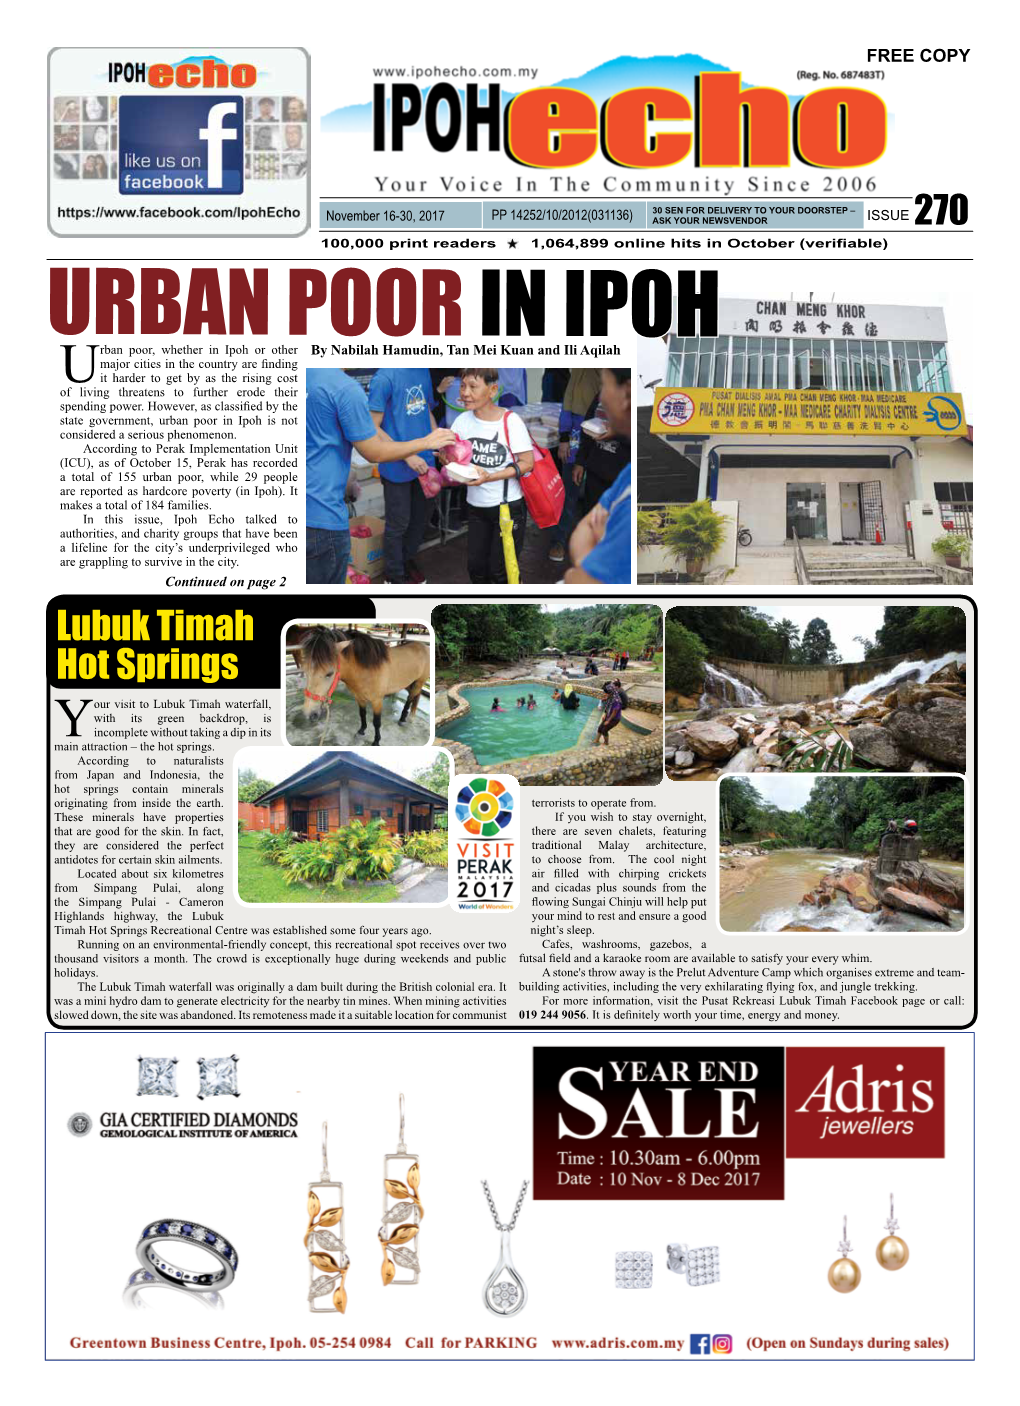 Urban Poor in Ipoh Is Not Considered a Serious Phenomenon